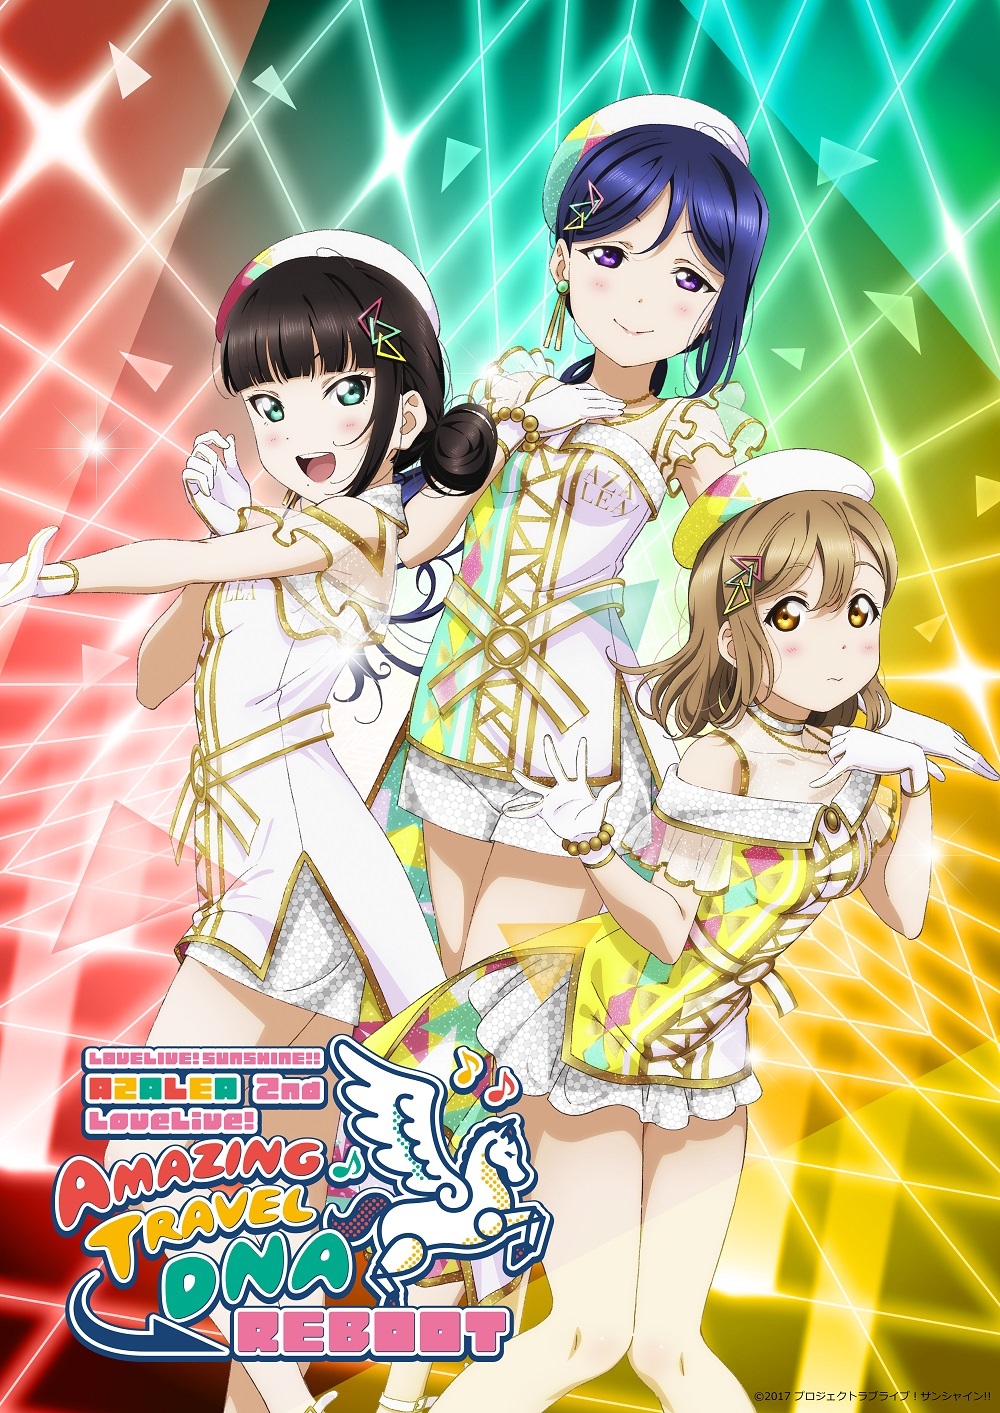 [Streaming+] Love Live!Sunshine!! AZALEA 2nd LoveLive! ～Amazing Travel DNA Reboot～ [Go To Event]